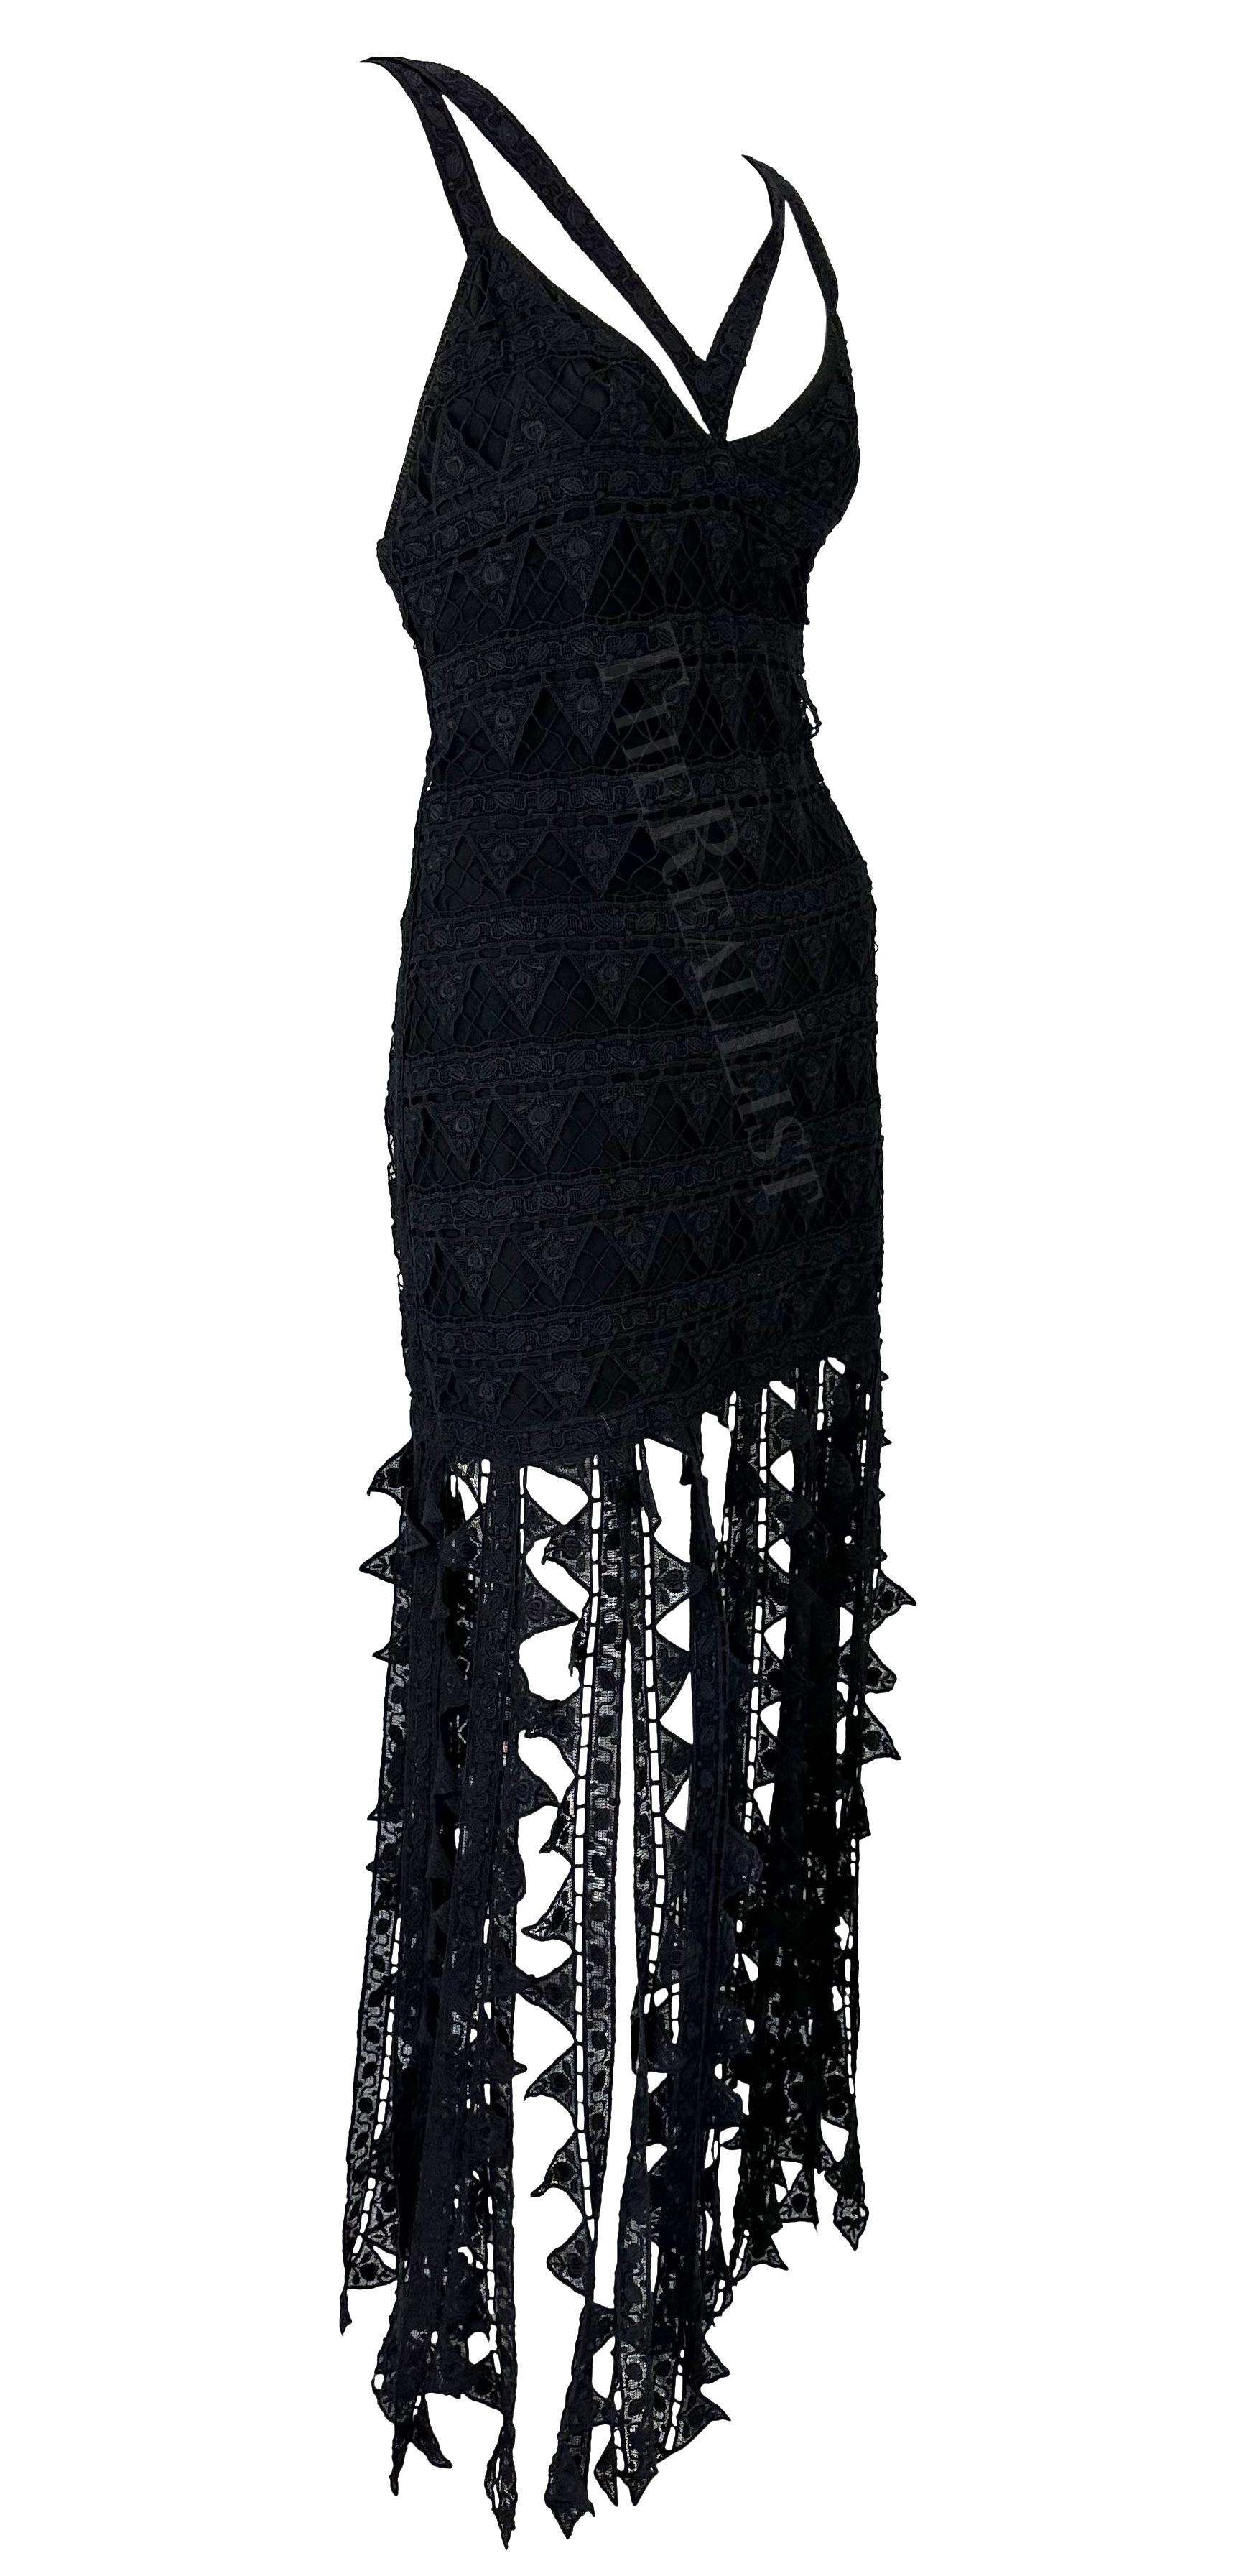 S/S 1993 Chloé by Karl Lagerfeld Runway Black Floral Triangle Lace Dress For Sale 6